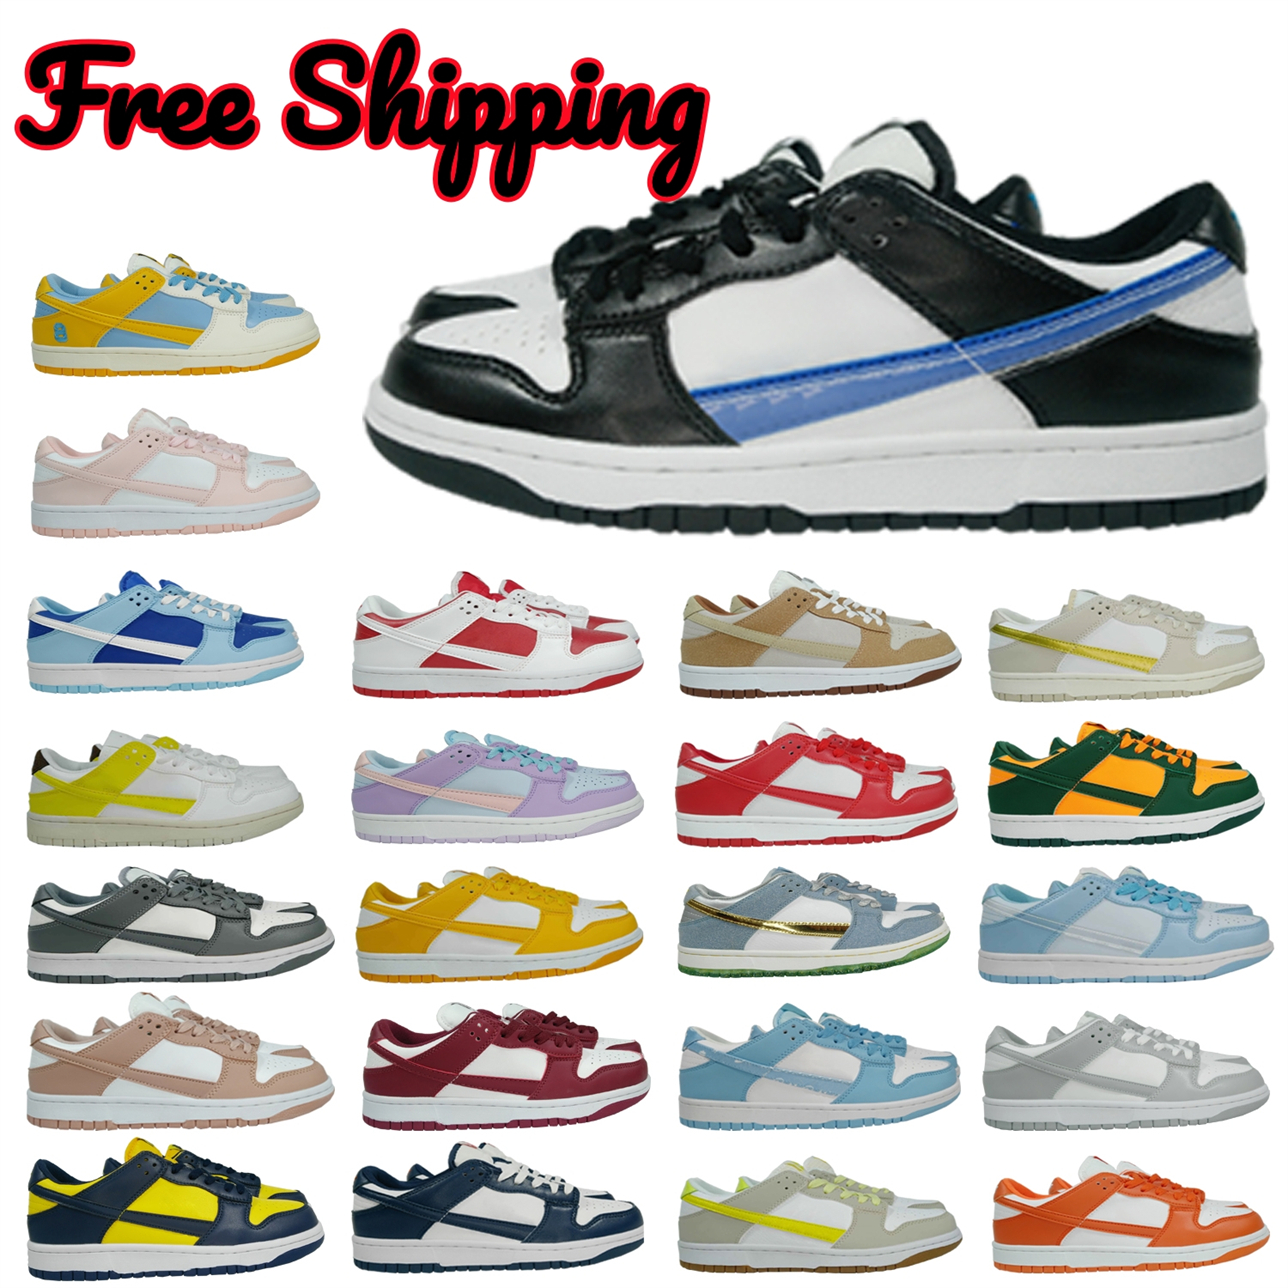 

Outdoors Lows Sports Trainers Wmns Running Shoes Mens Sneakers Retro Classic Basketball Shoes Walking Jogging Flat Lows Football Boots, #s01